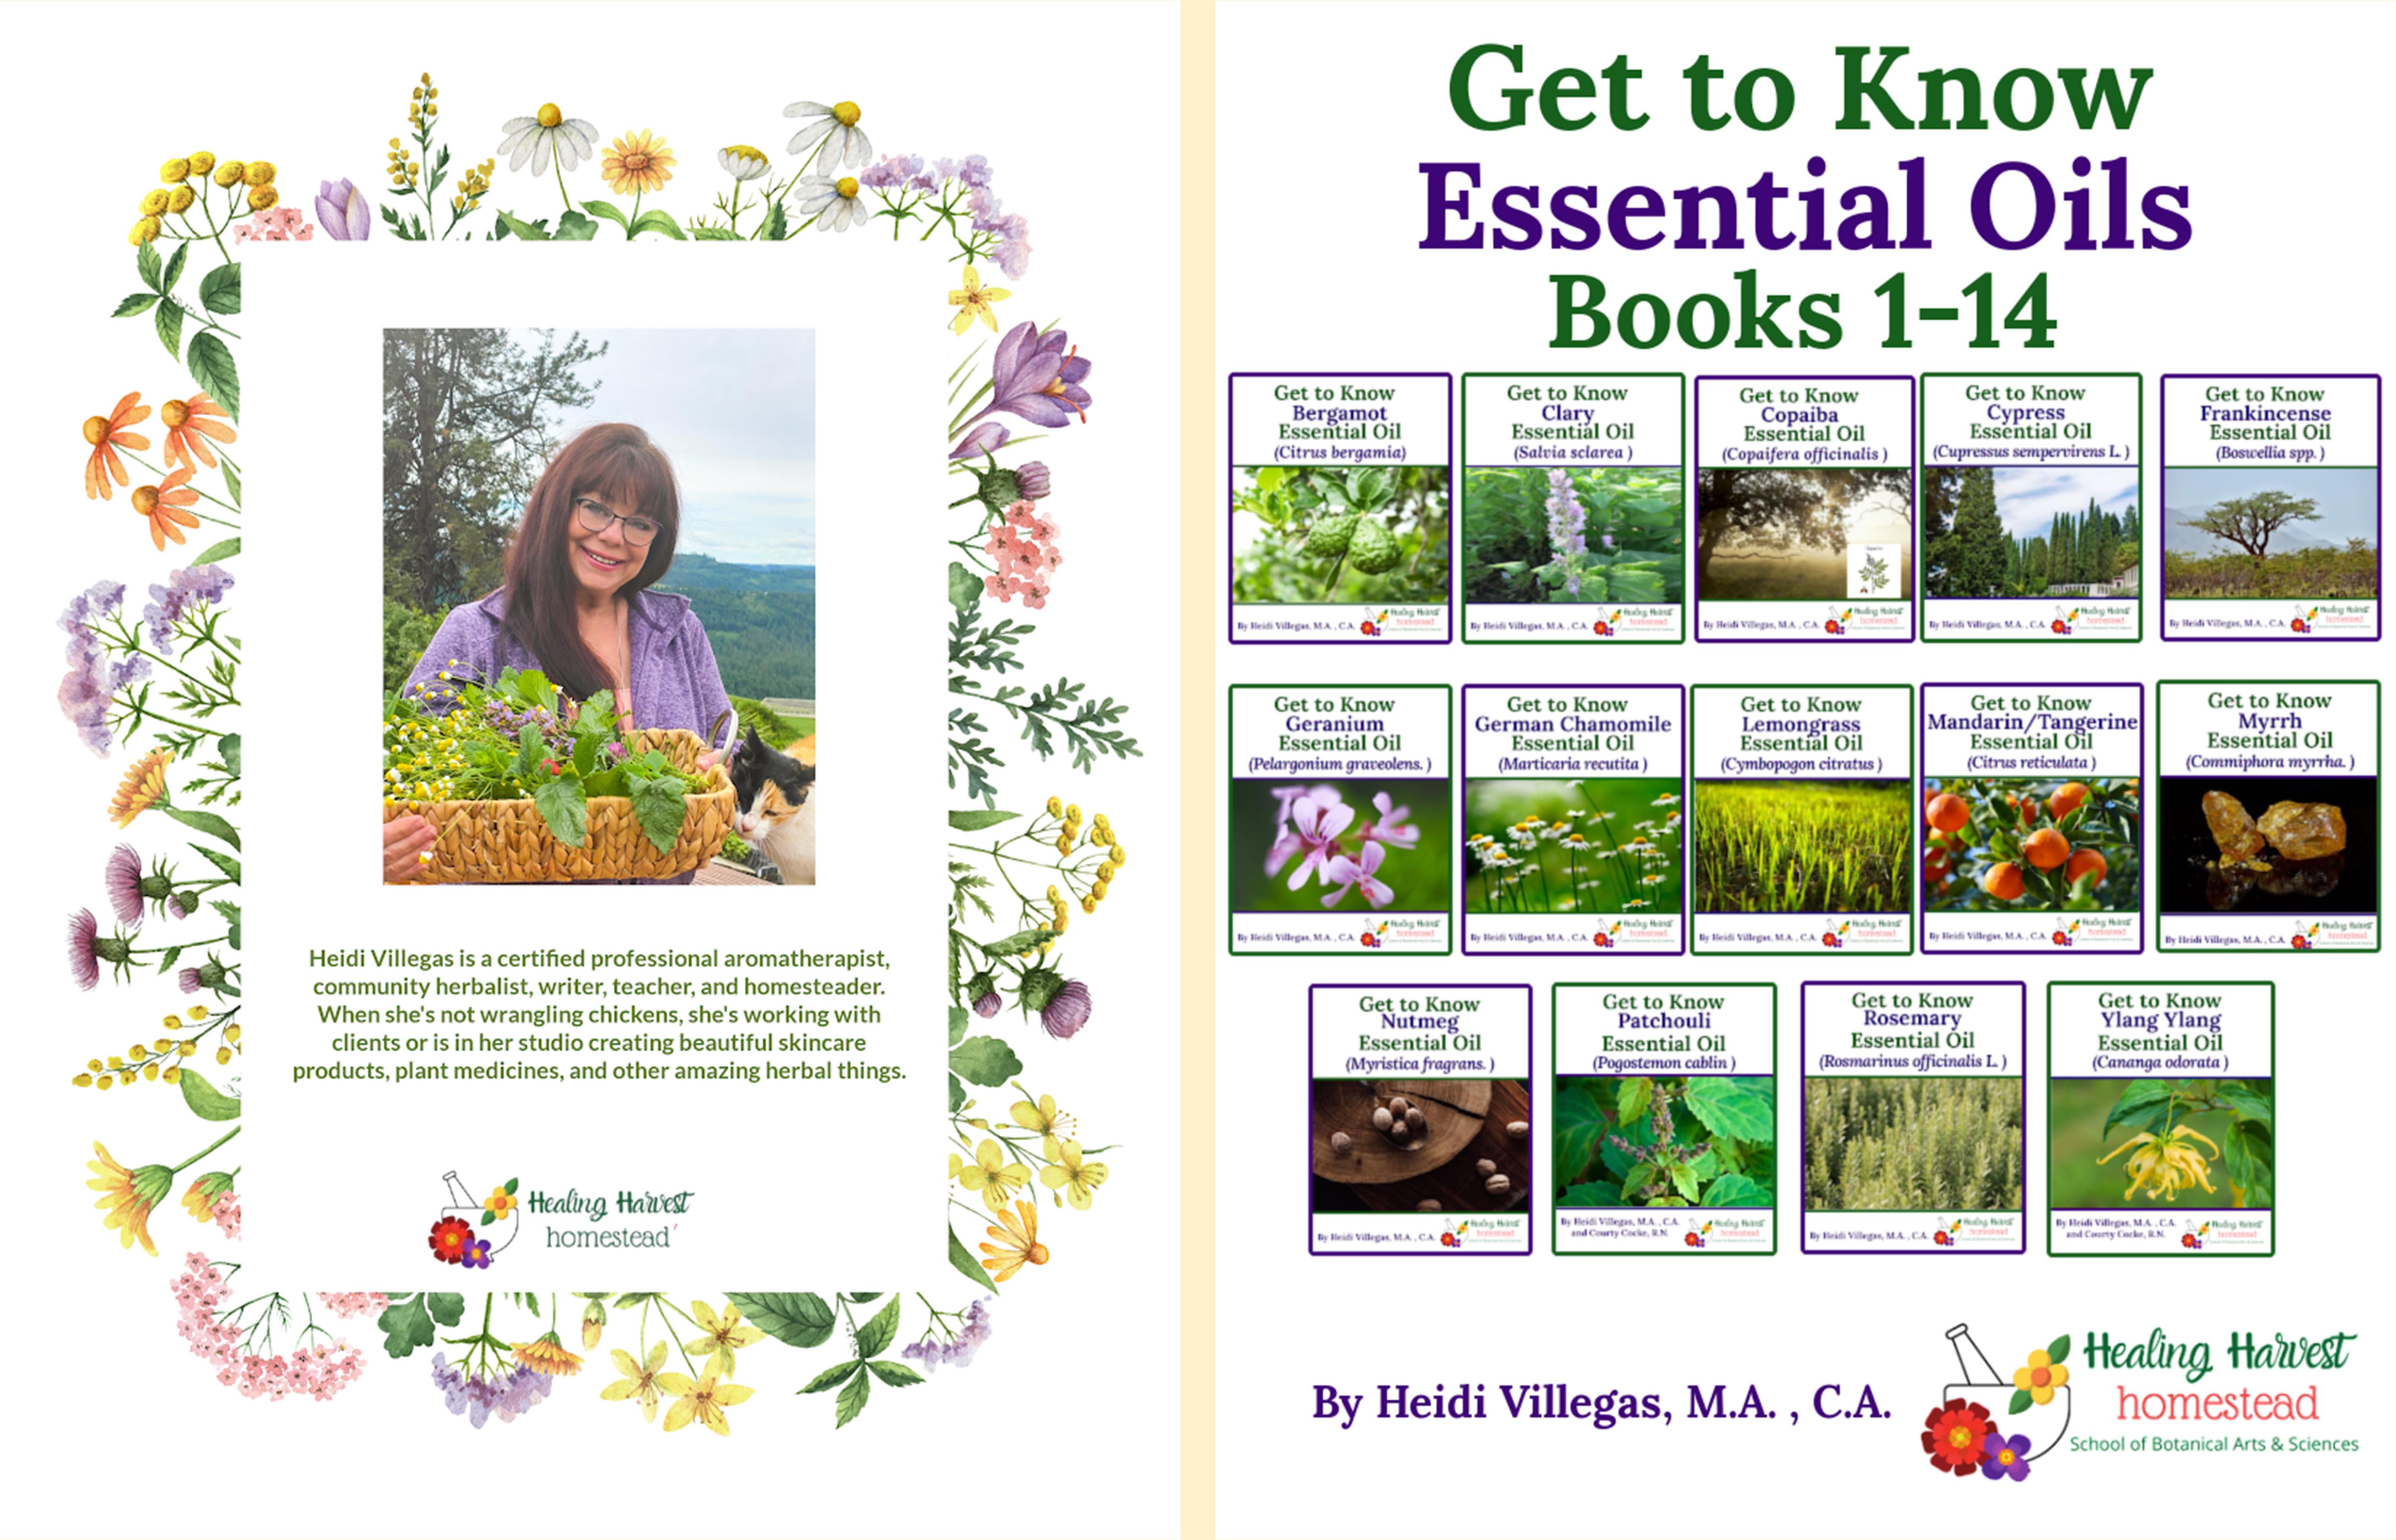 Getting to Know Essential Oils Book 1-14 cover image